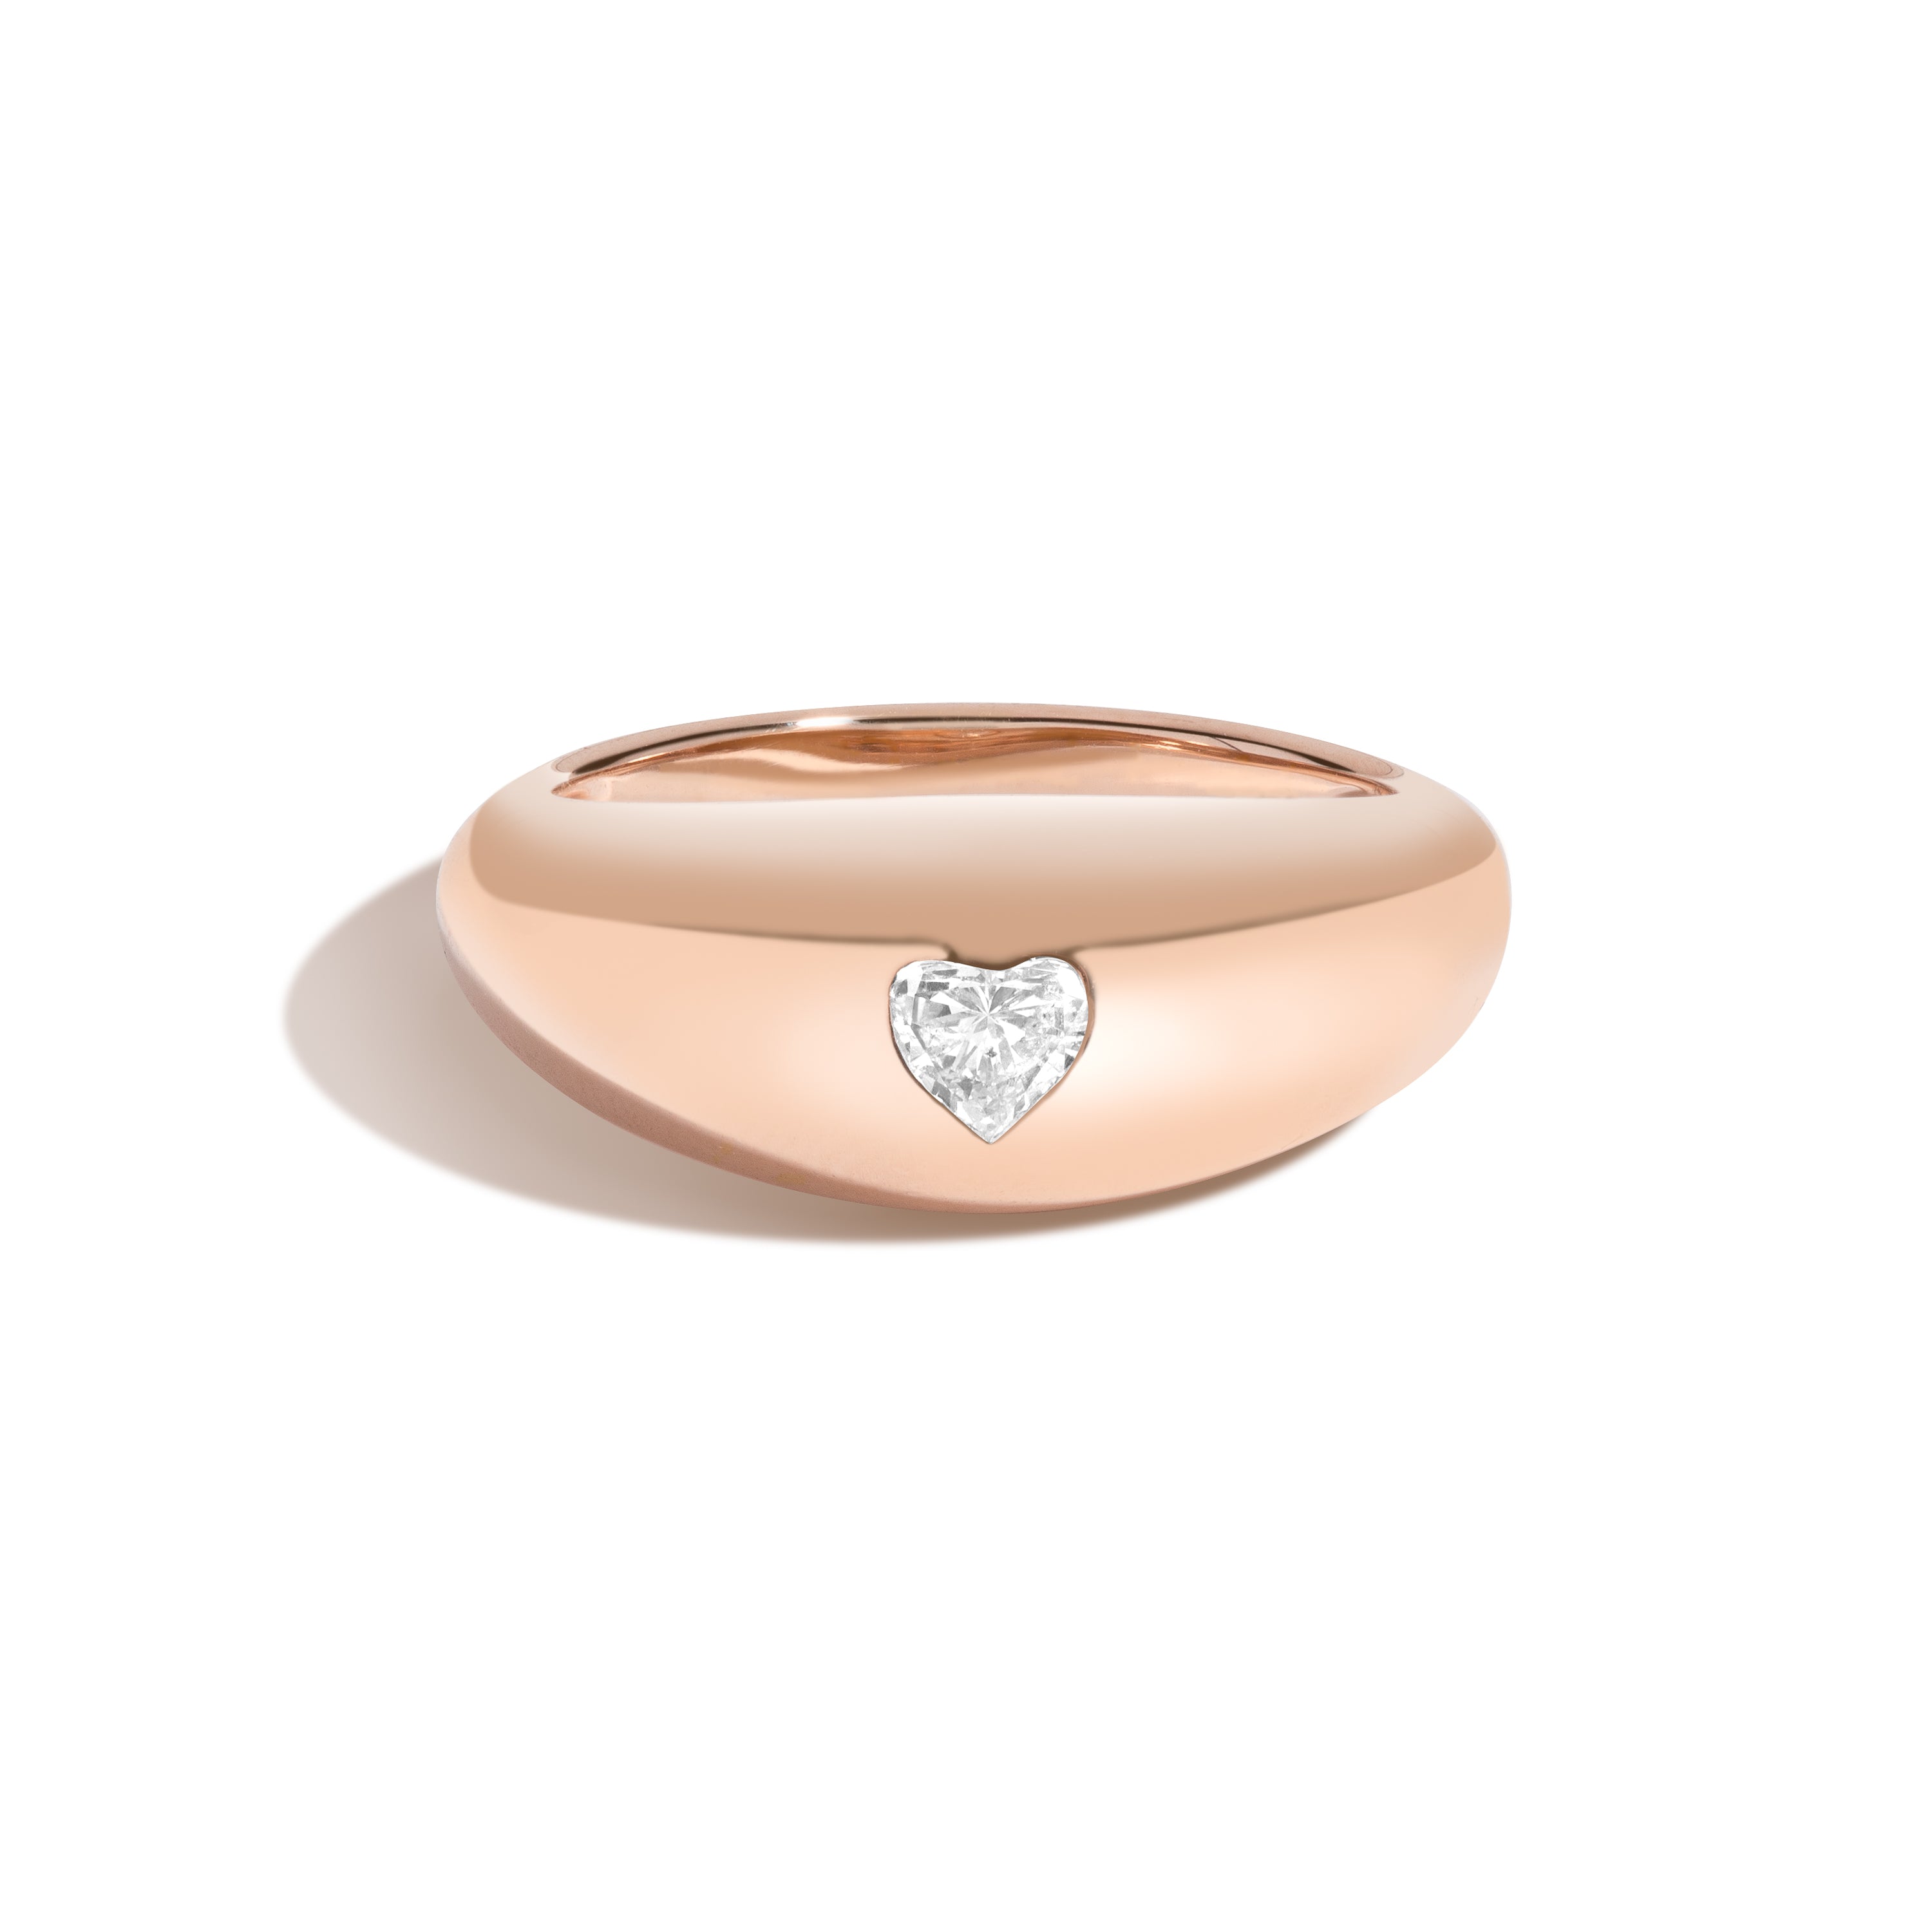 Shahla Karimi Bombe Ring with Heart Rose Gold